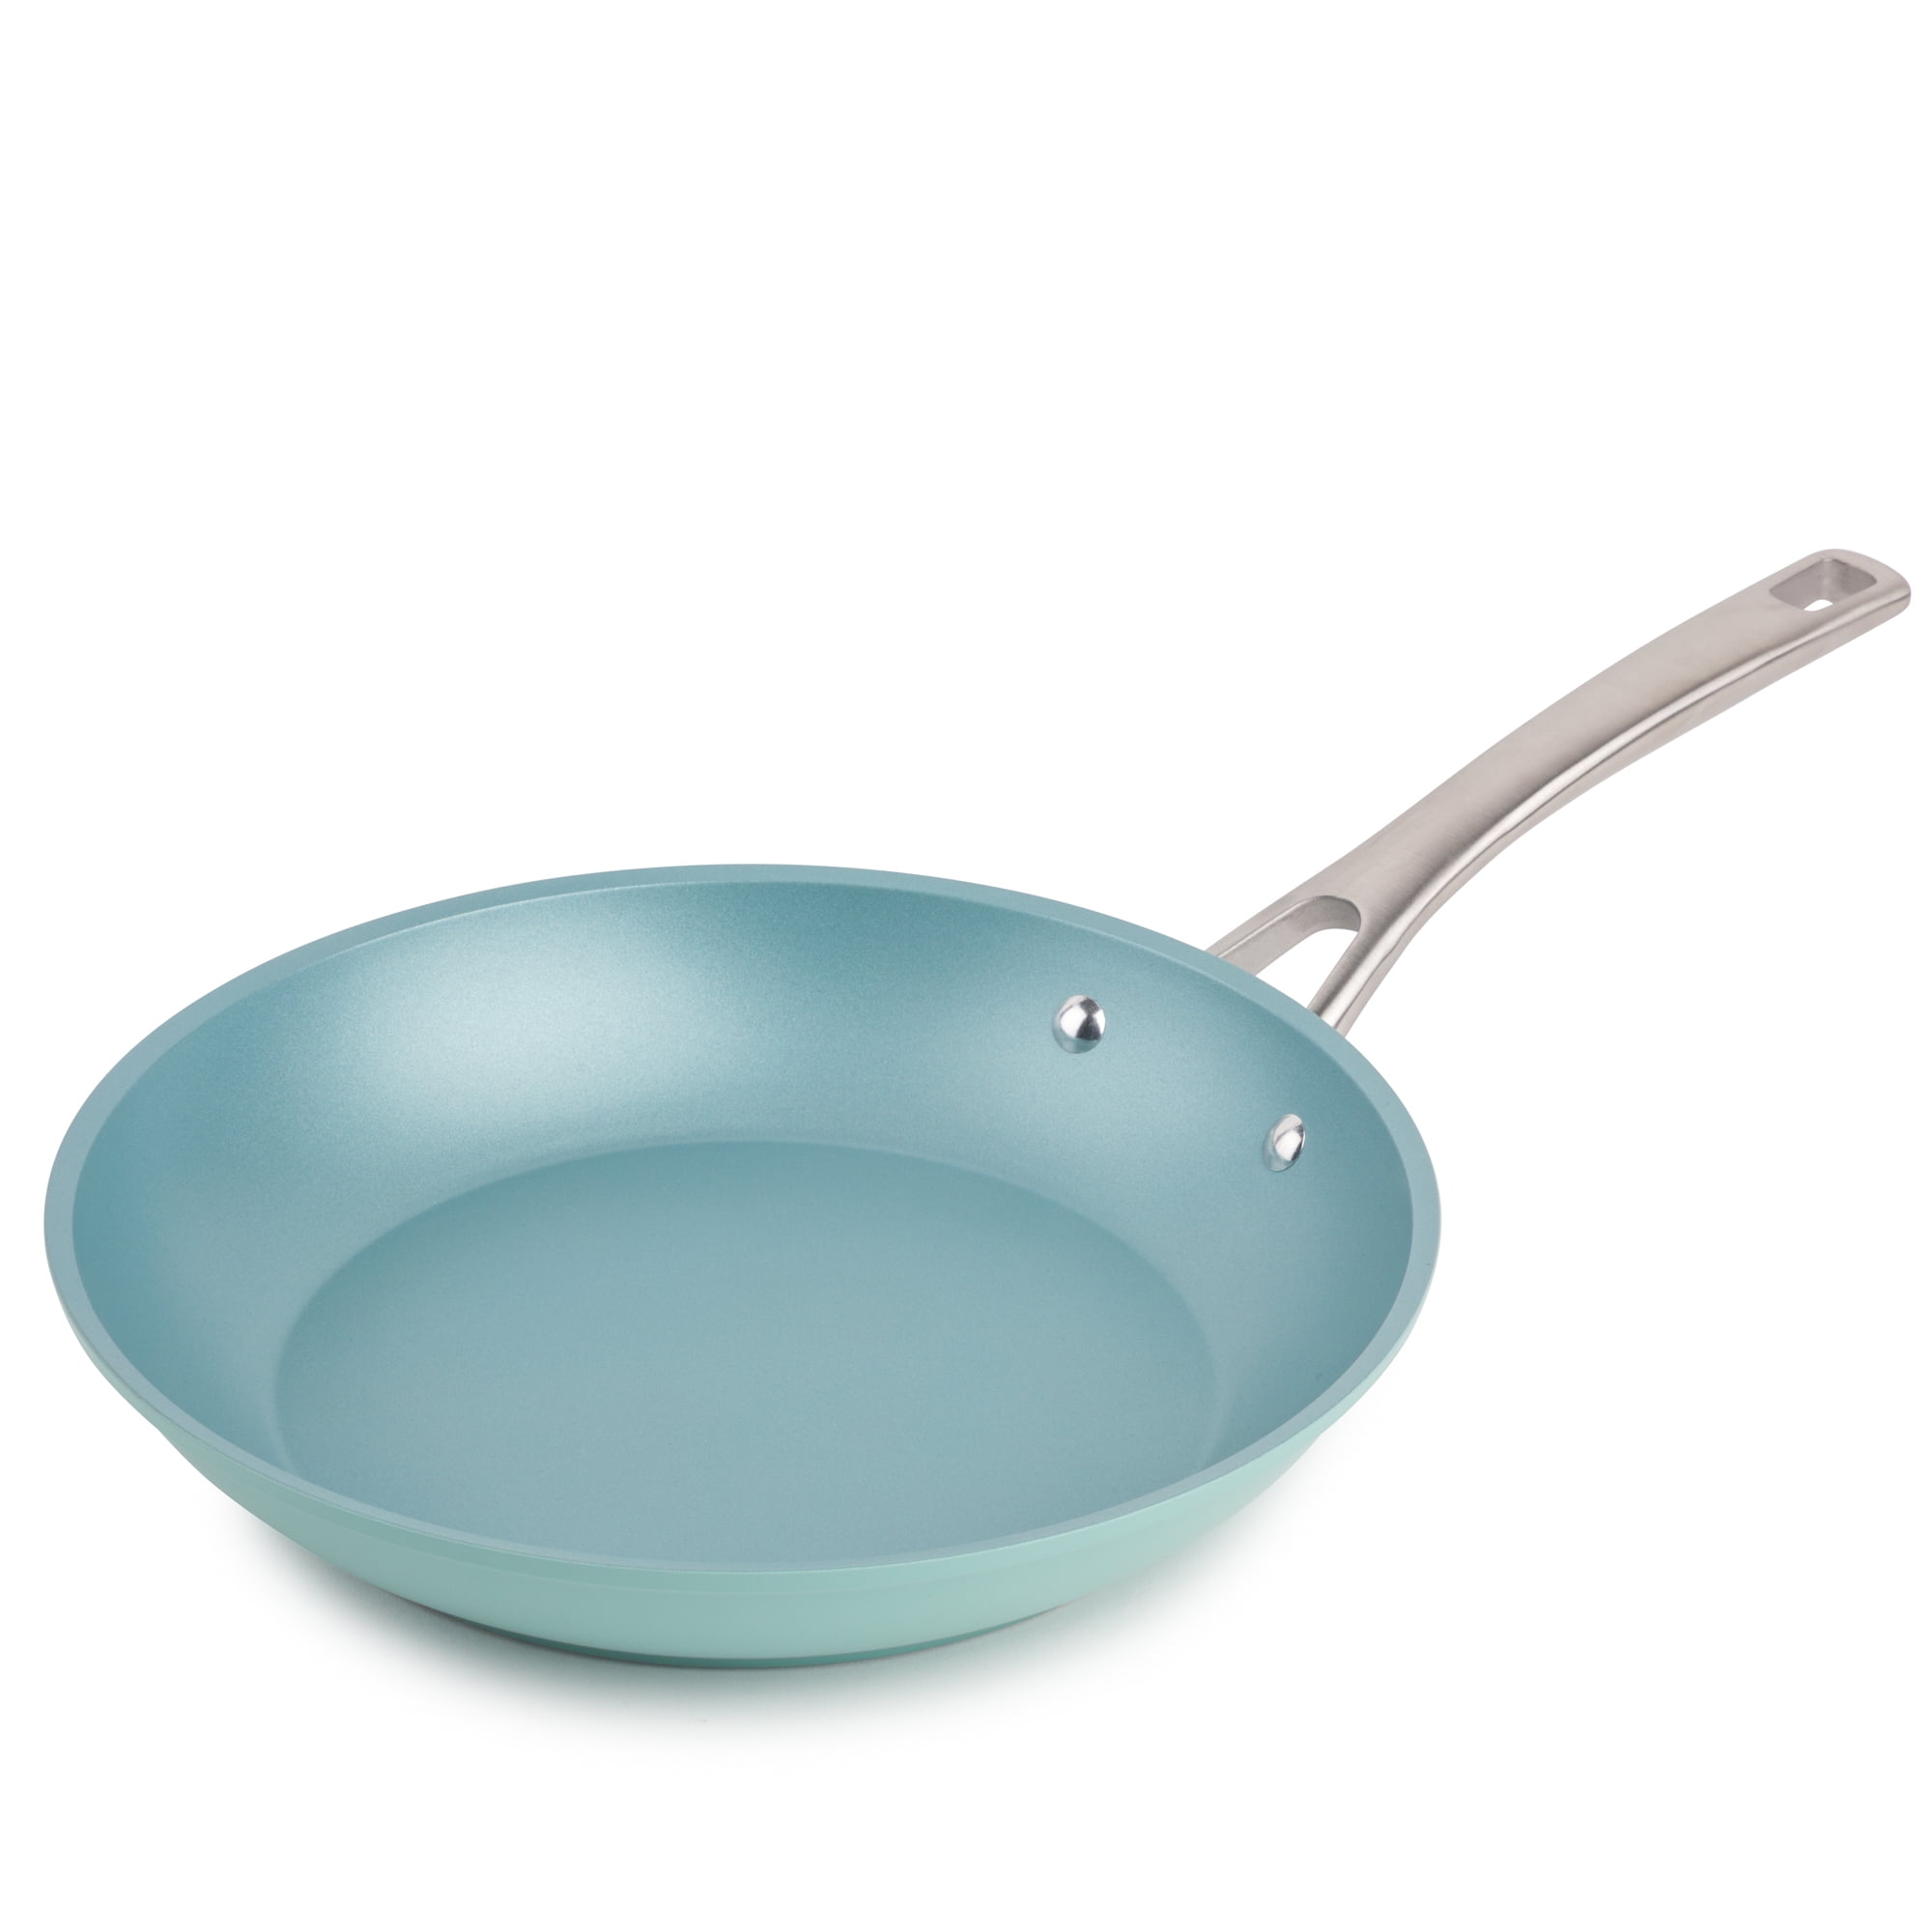 Thyme&Table Non-Stick Fry Pan with Stainless Steel Base - Blue - 12.5 in